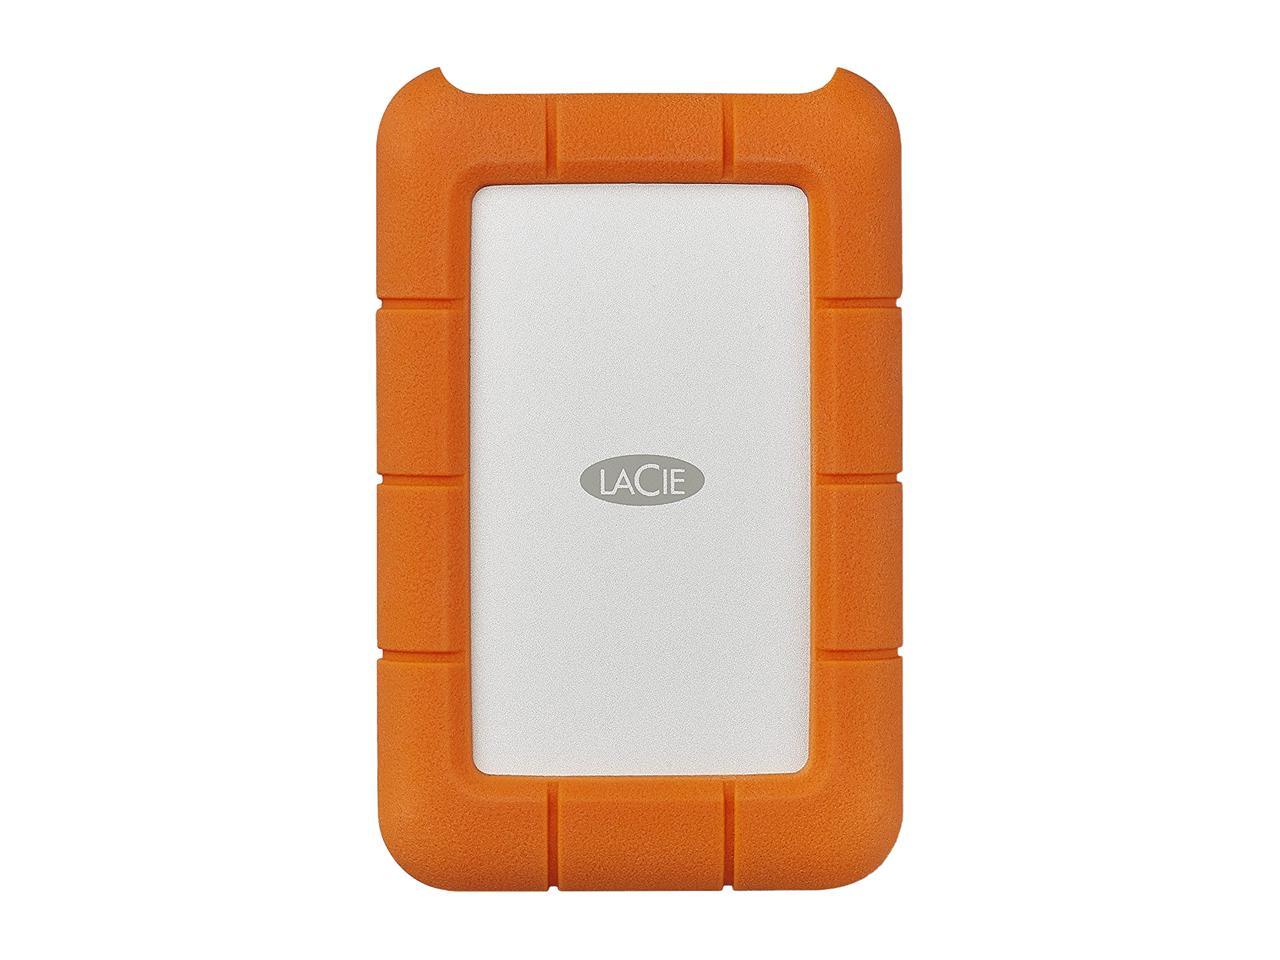 LaCie Rugged USB-C 4TB External Hard Drive Portable HDD – USB 3.0, Drop Shock Dust Rain Resistant Shuttle Drive, for Mac and PC Computer Desktop Workstation Laptop, 1 Month Adobe CC (STFR4000800)